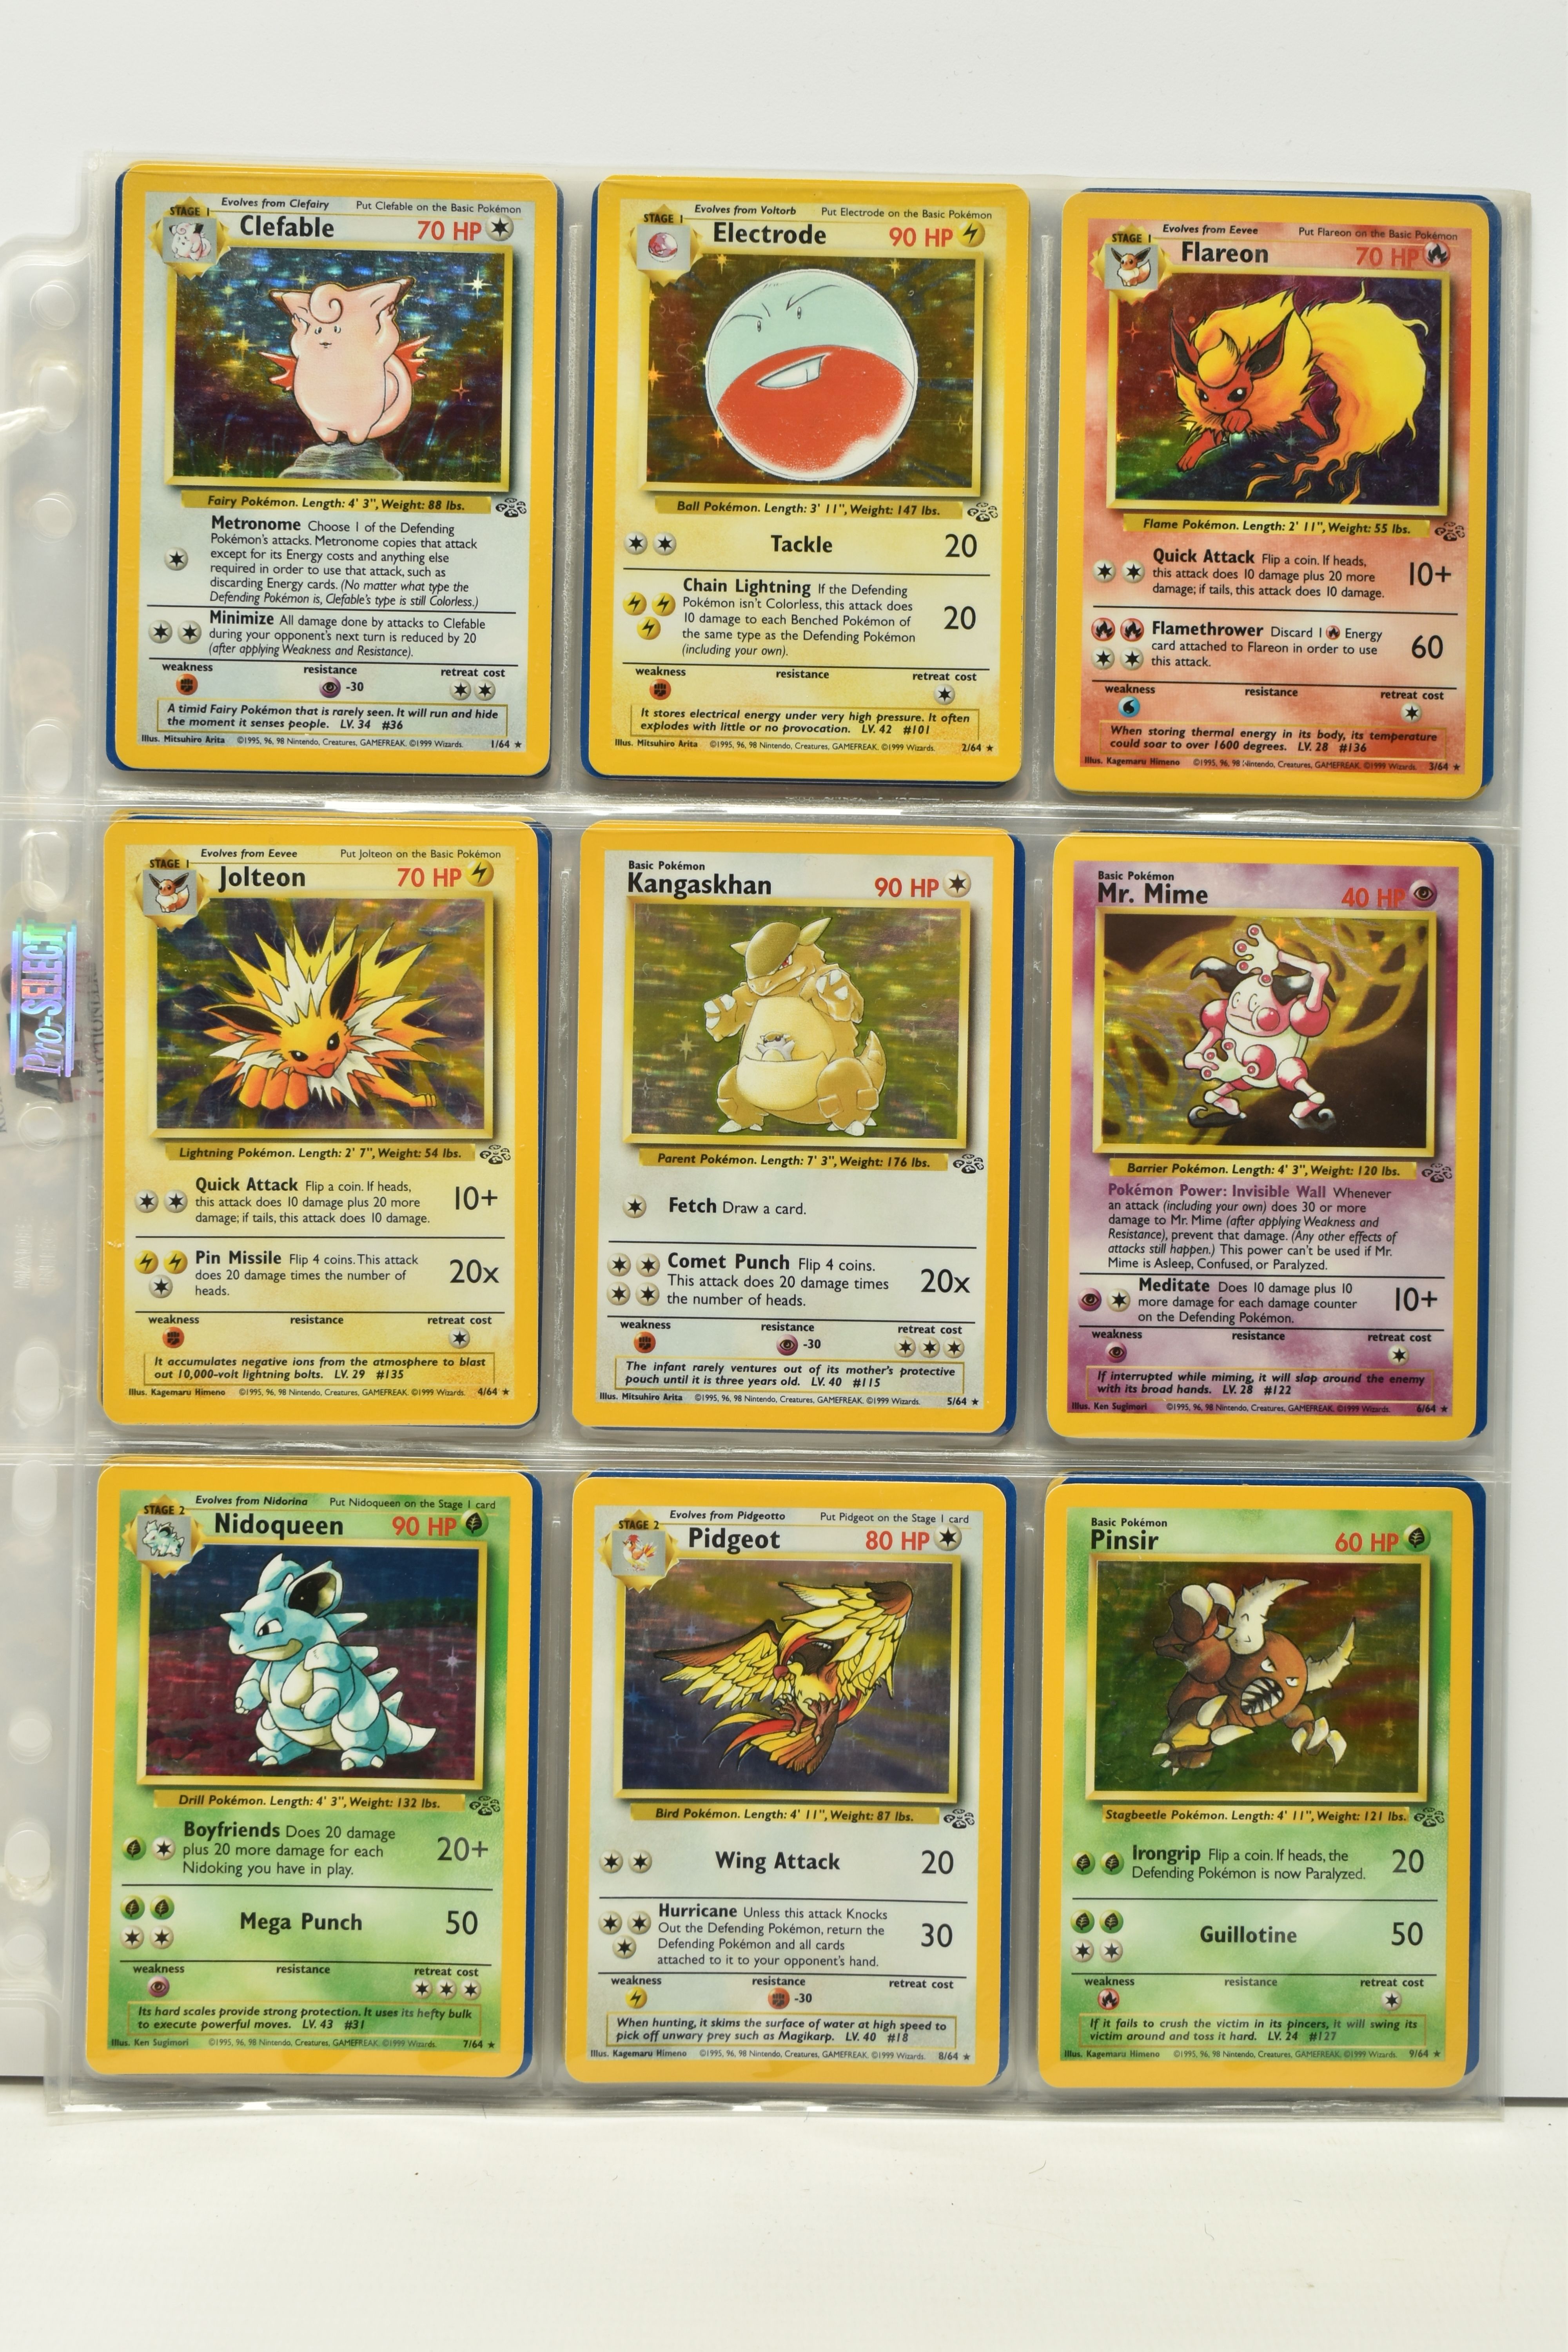 POKEMON COMPLETE JUNGLE SET, all 64 cards are present, no first editions are included, condition